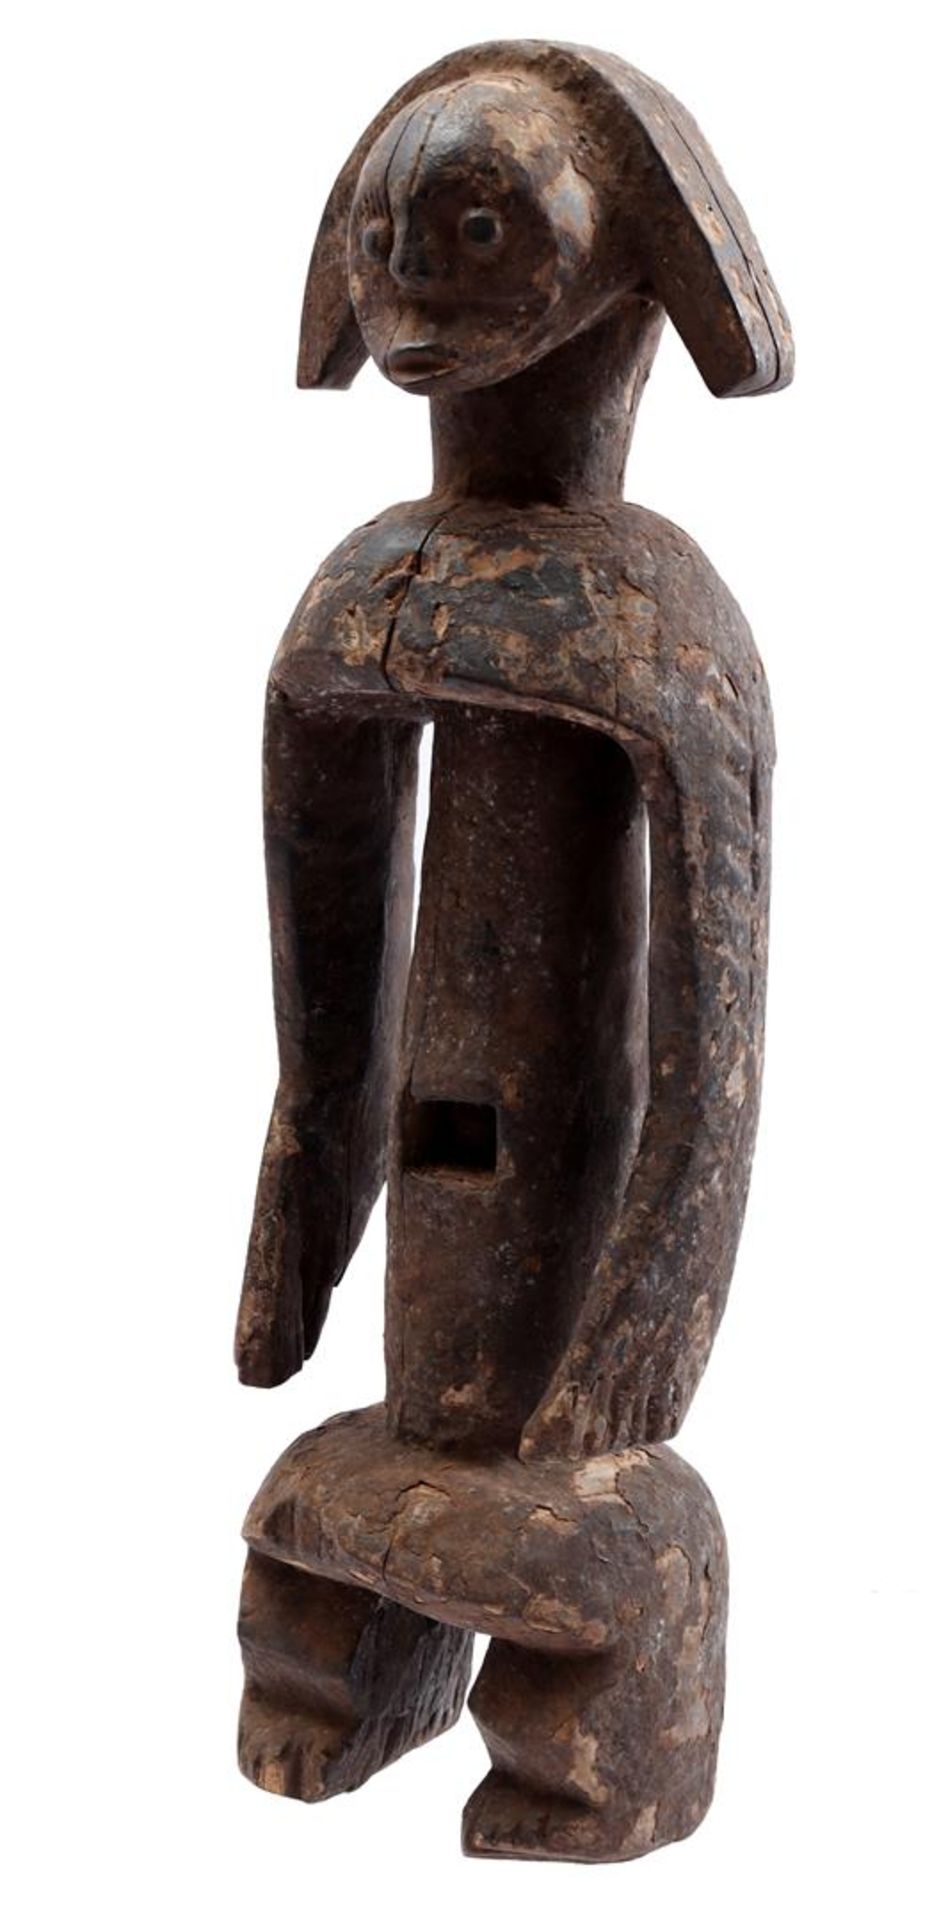 Wooden ceremonial statue of a woman, Mumuye - Image 4 of 4